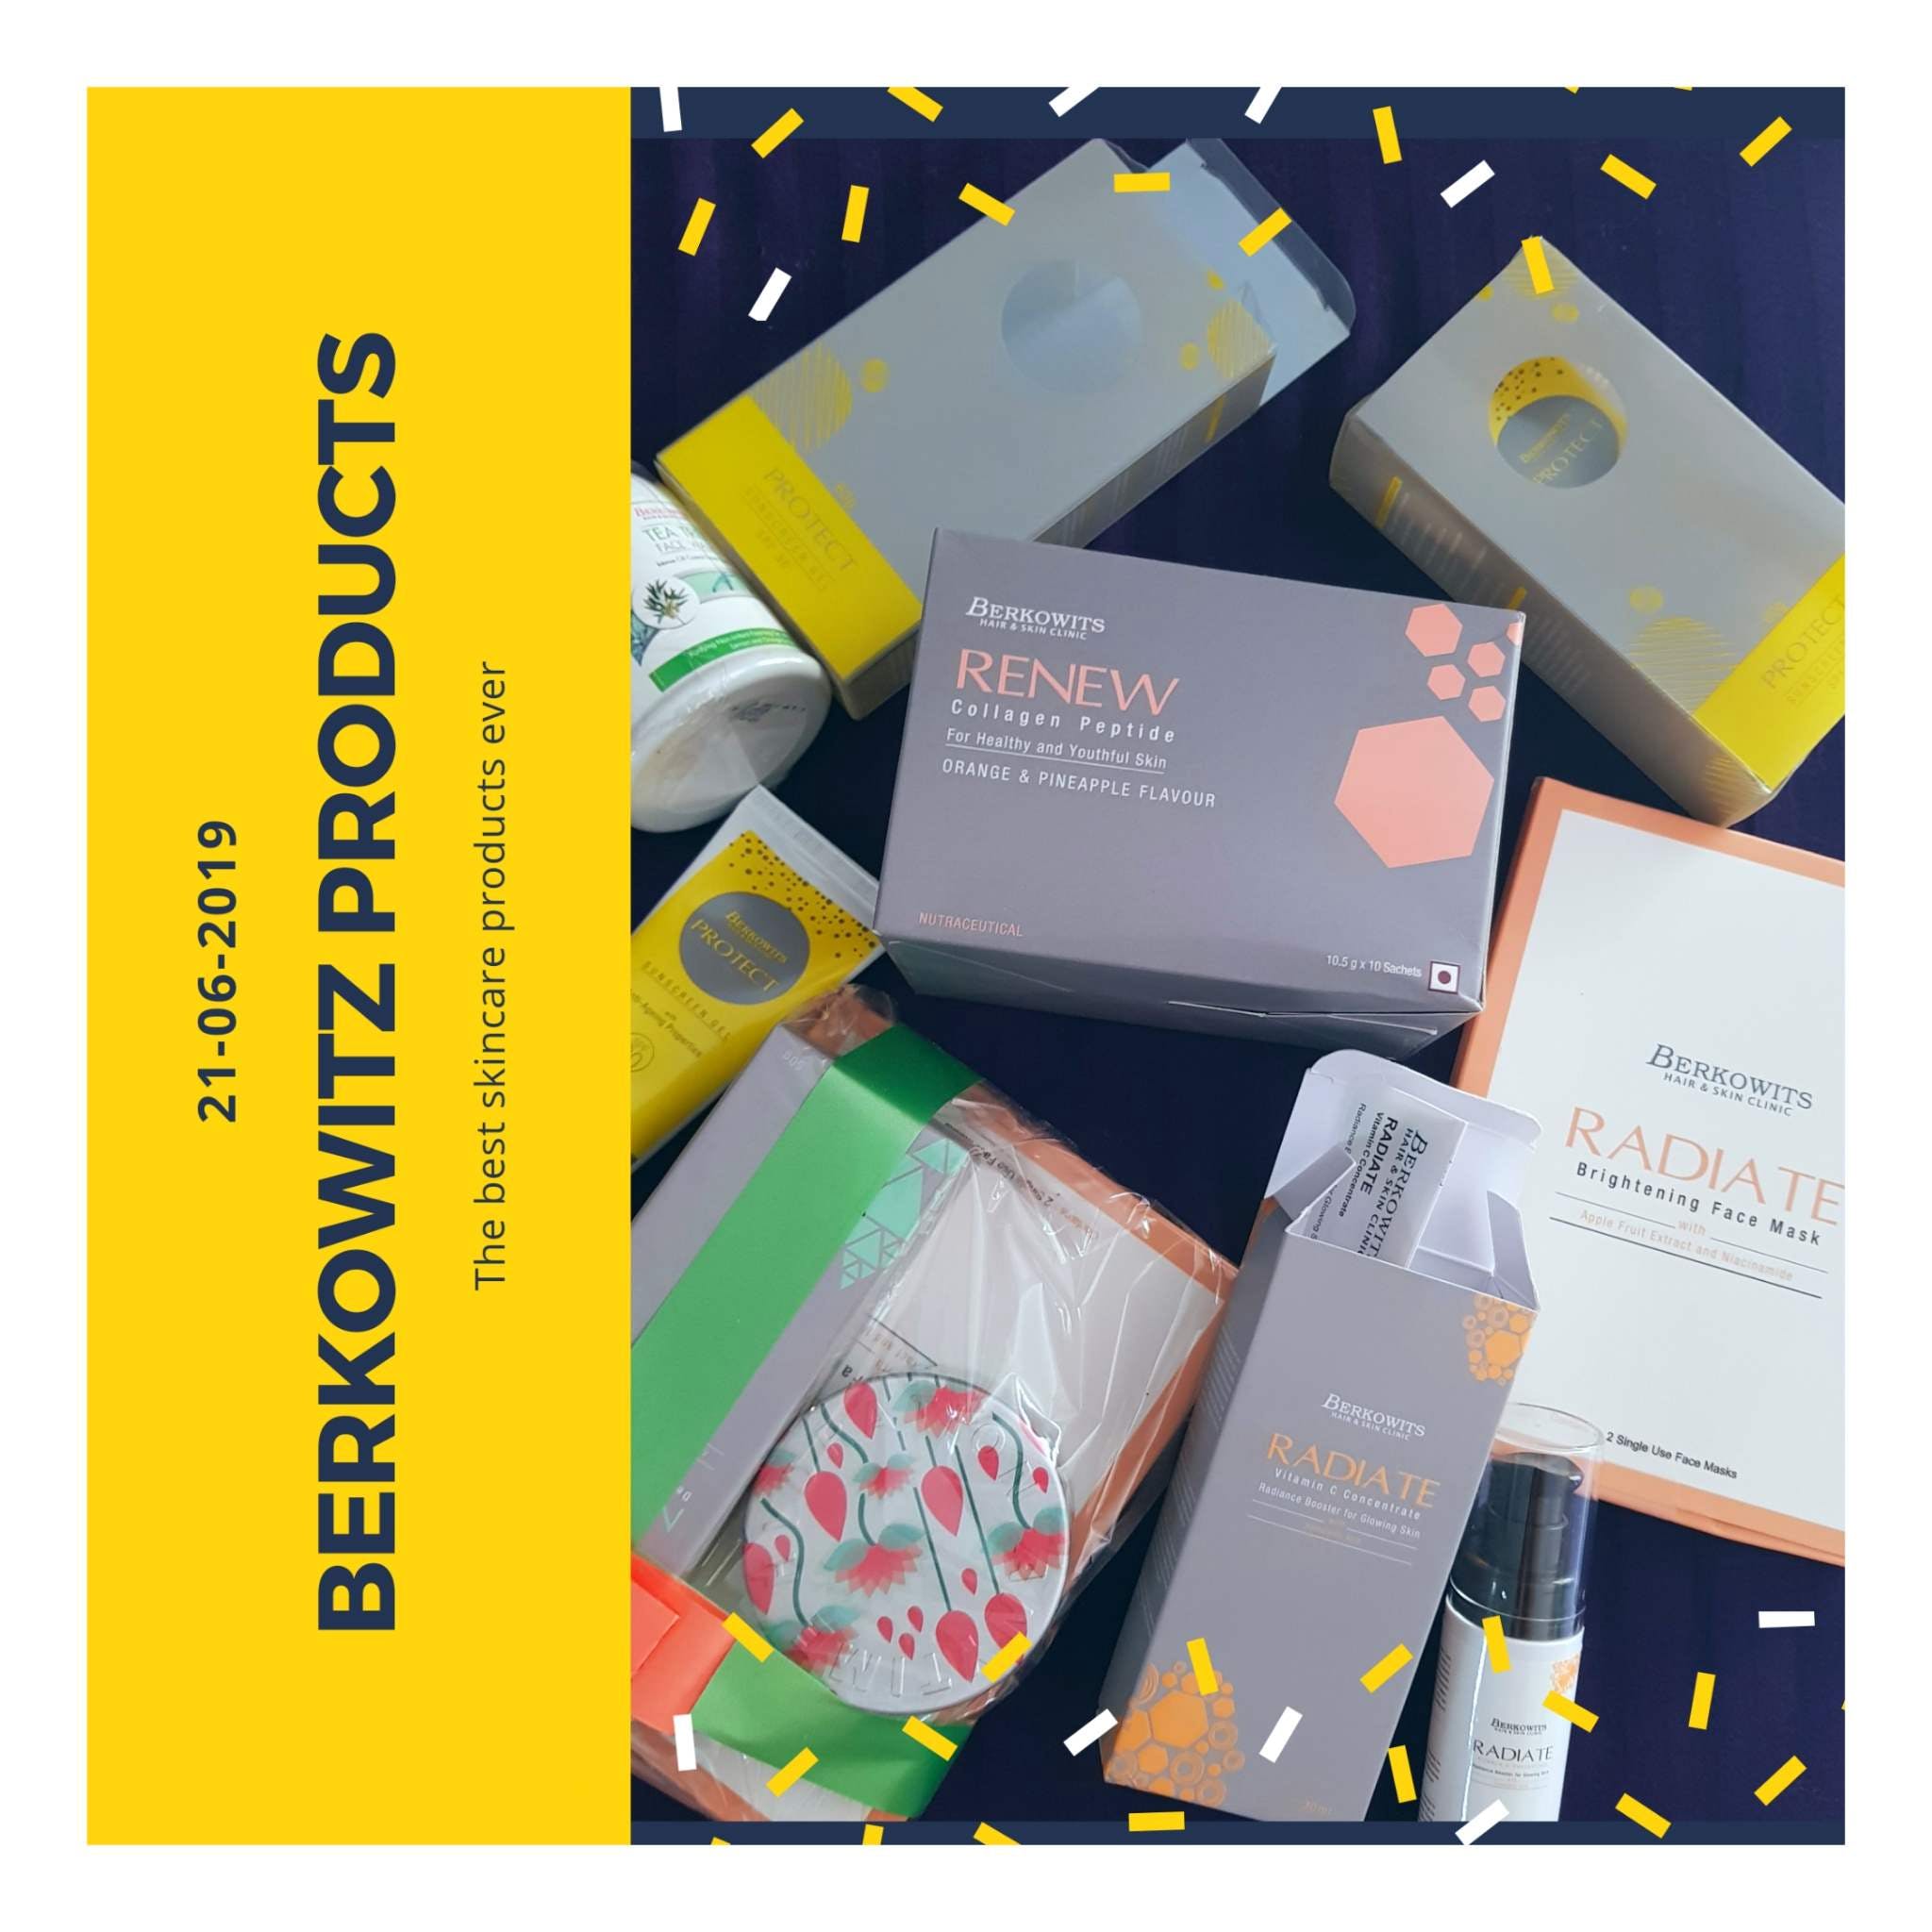 Berkowitz Skin Care Products